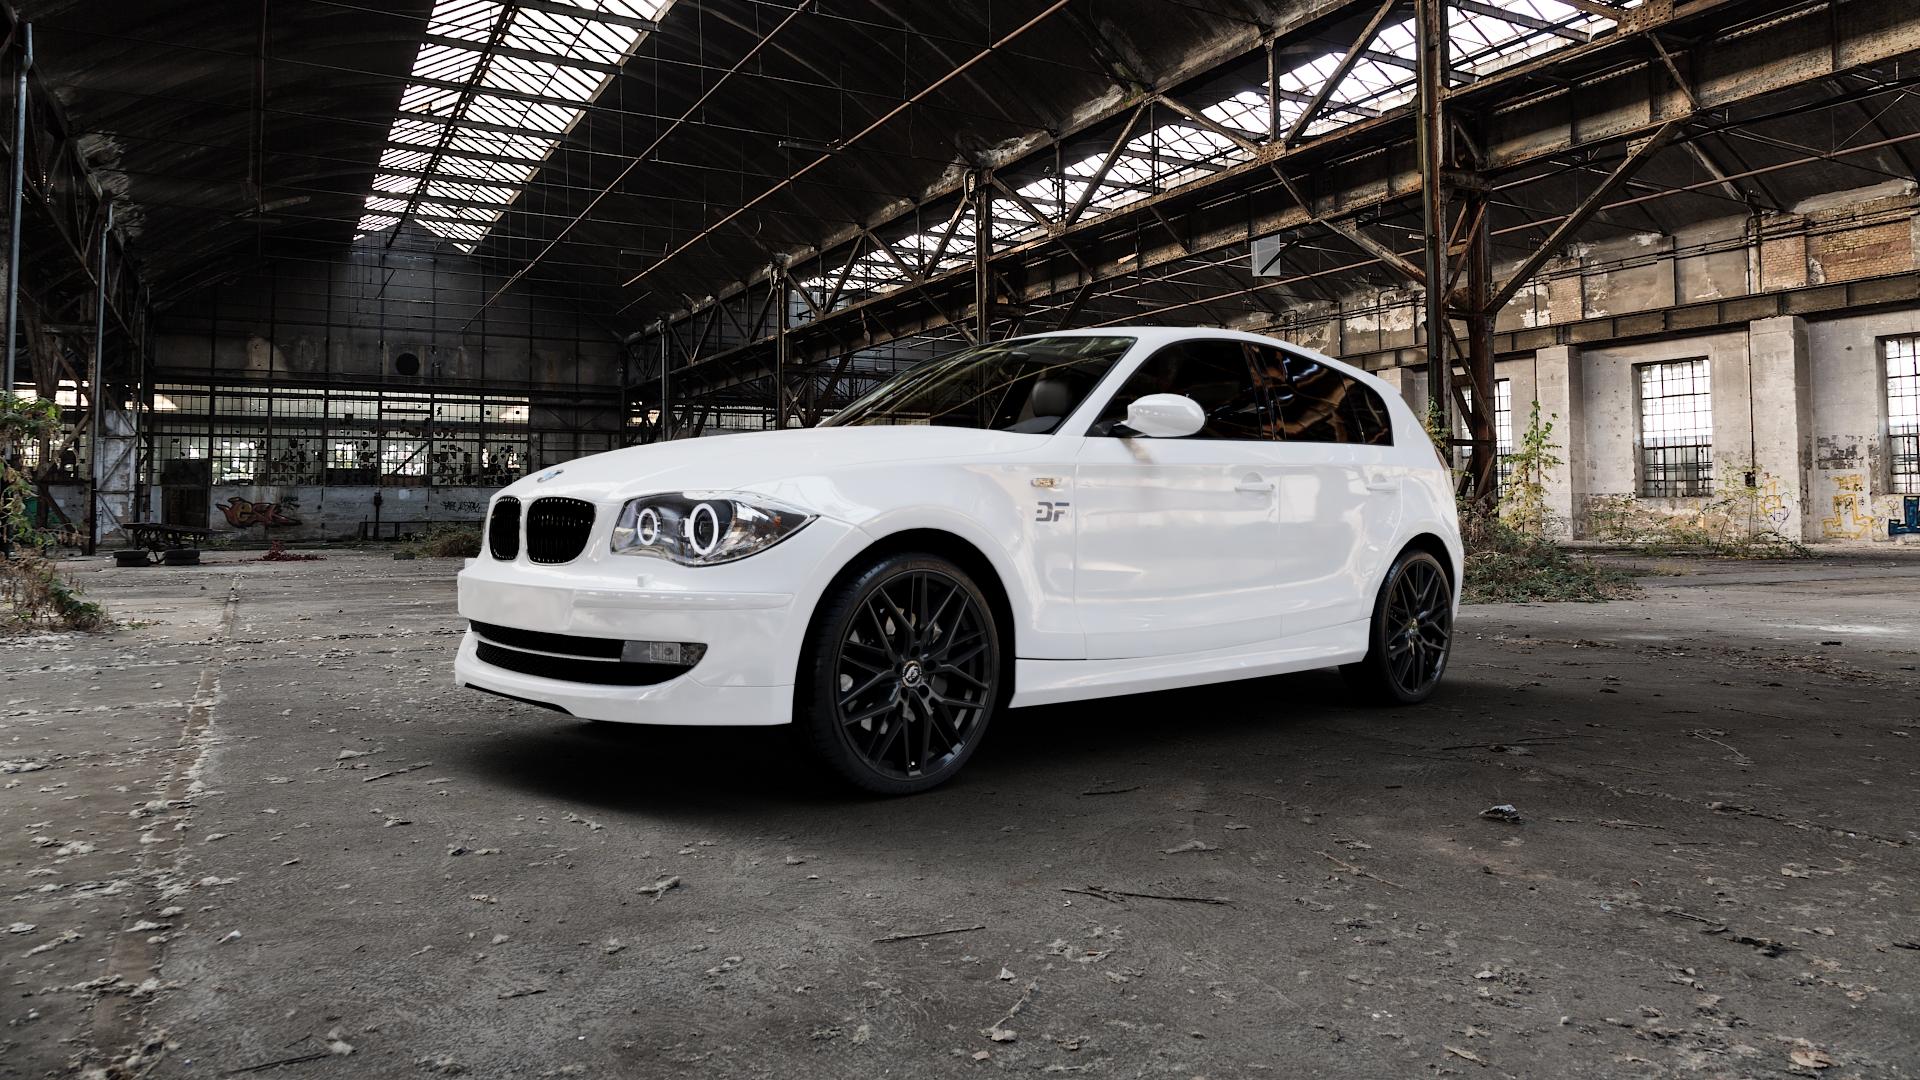 BMW 120d Type E87 2,0l D 110kW (150 hp) Wheels and Tyre Packages |  velonity.com